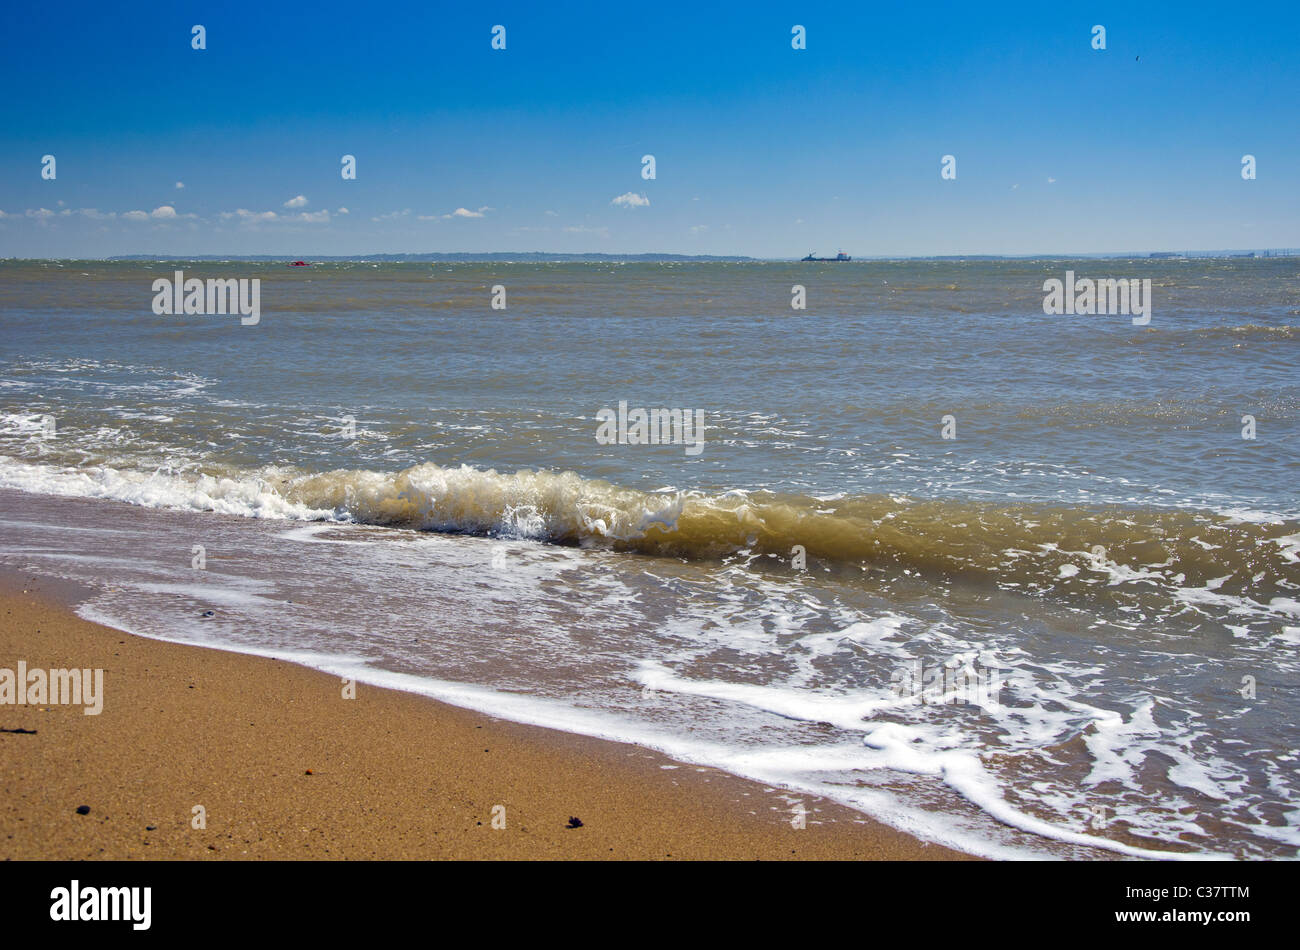 Waves On Beach Southend On Sea Essex High Resolution Stock Photography and  Images - Alamy